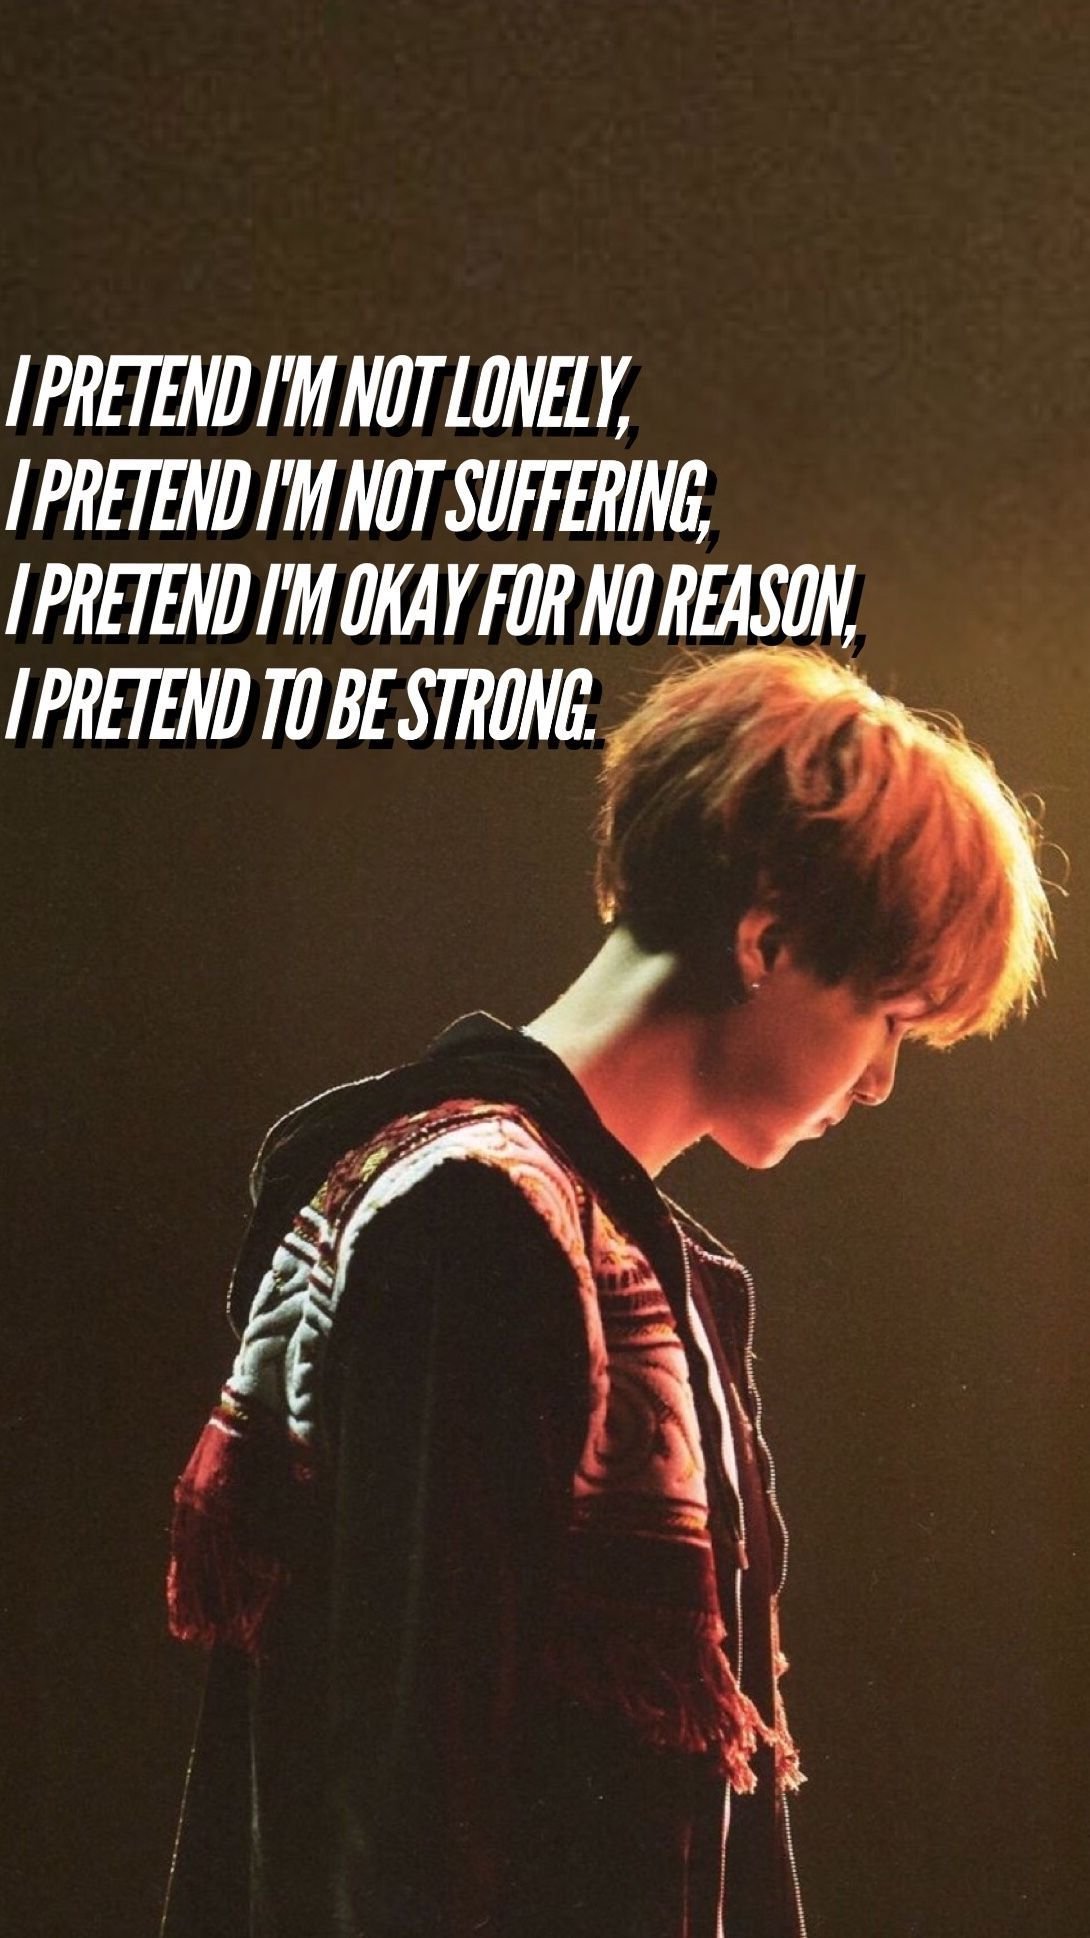 Min Yoongi Quotes Wallpaper Download | MobCup